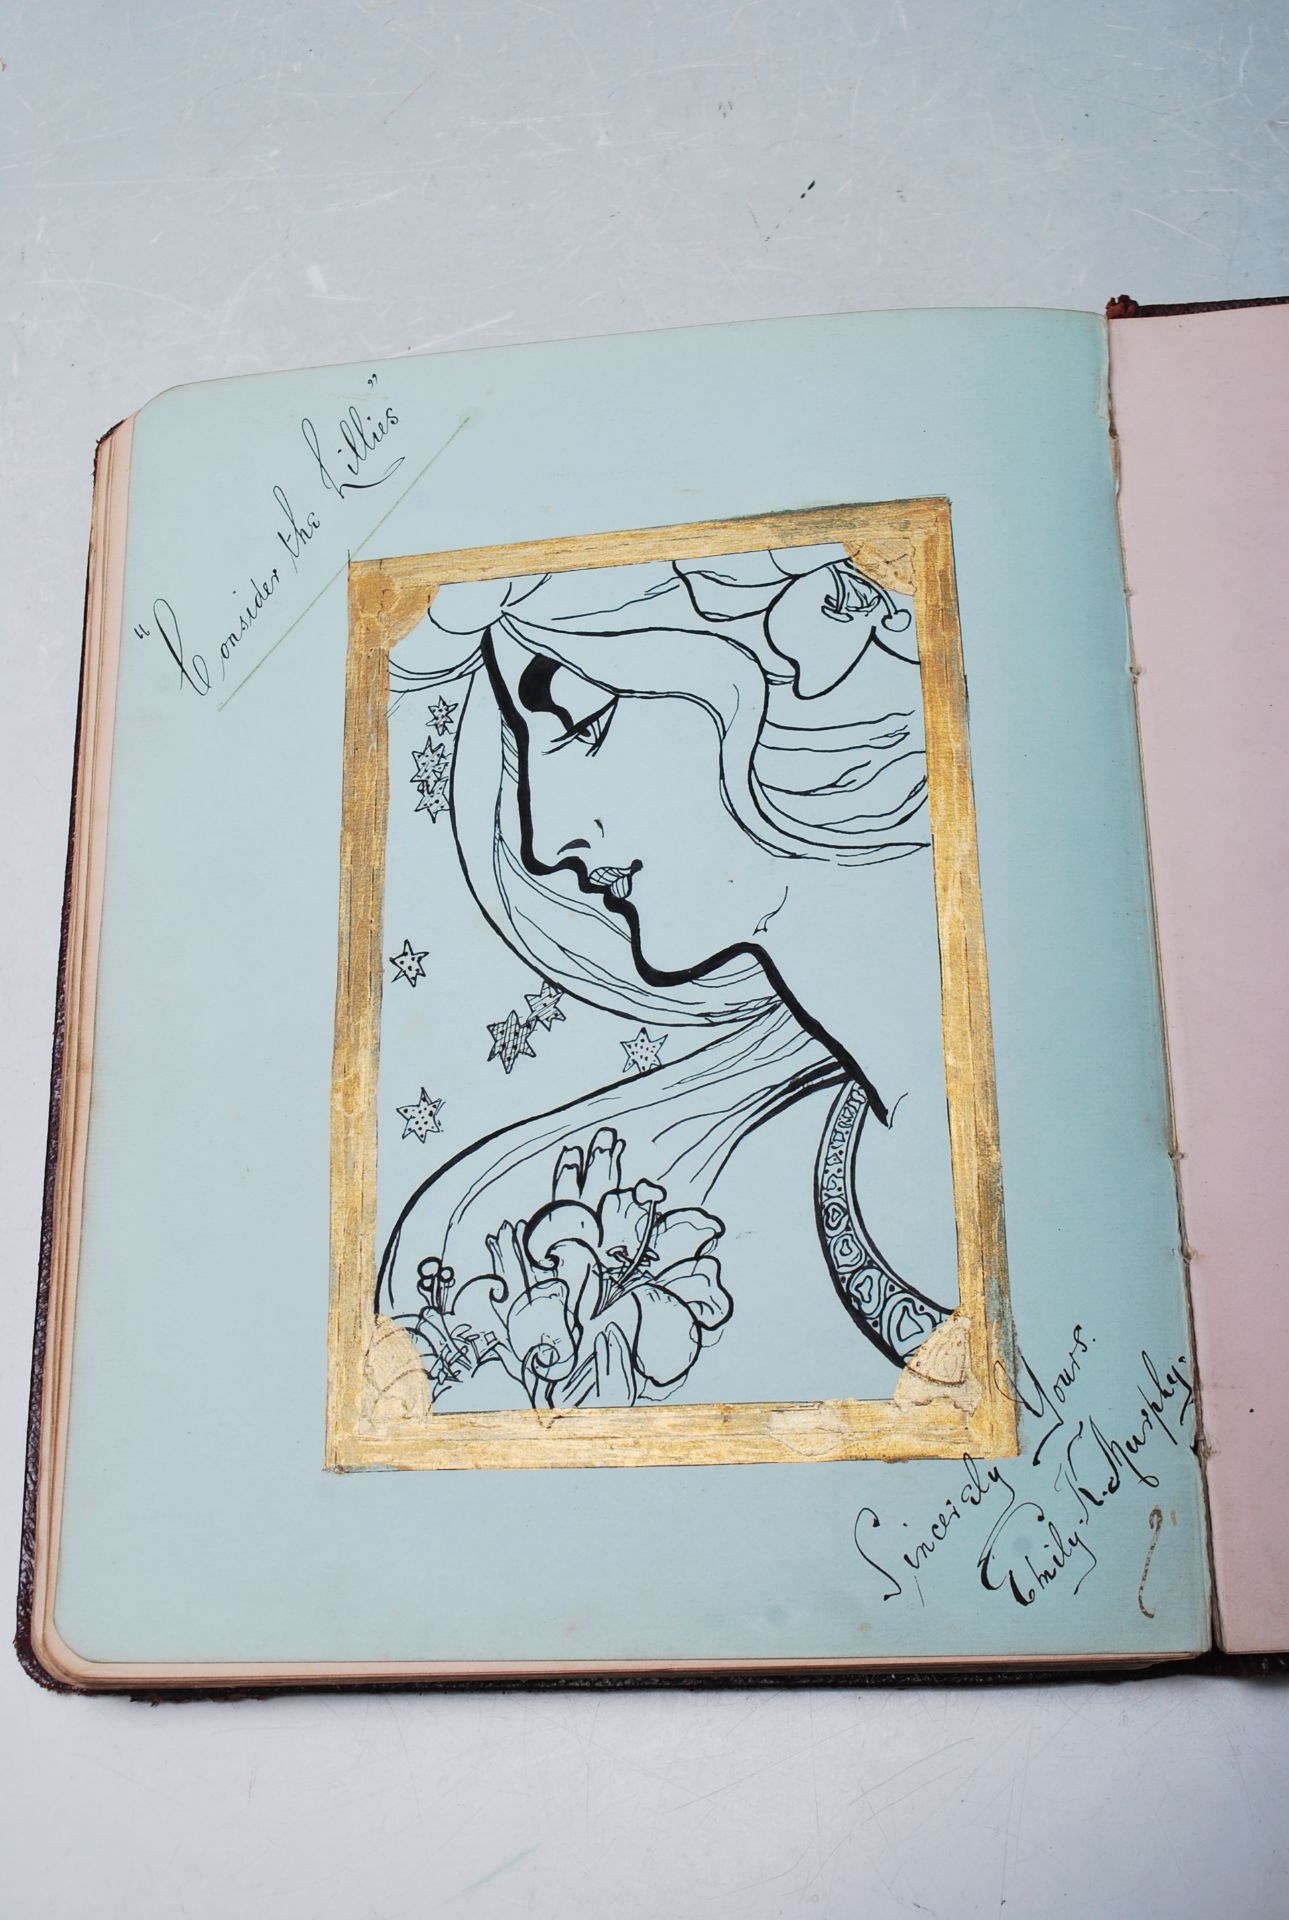 EDWARDIAN LOCAL INTEREST AUTOGRAPH BOOK - Image 10 of 15